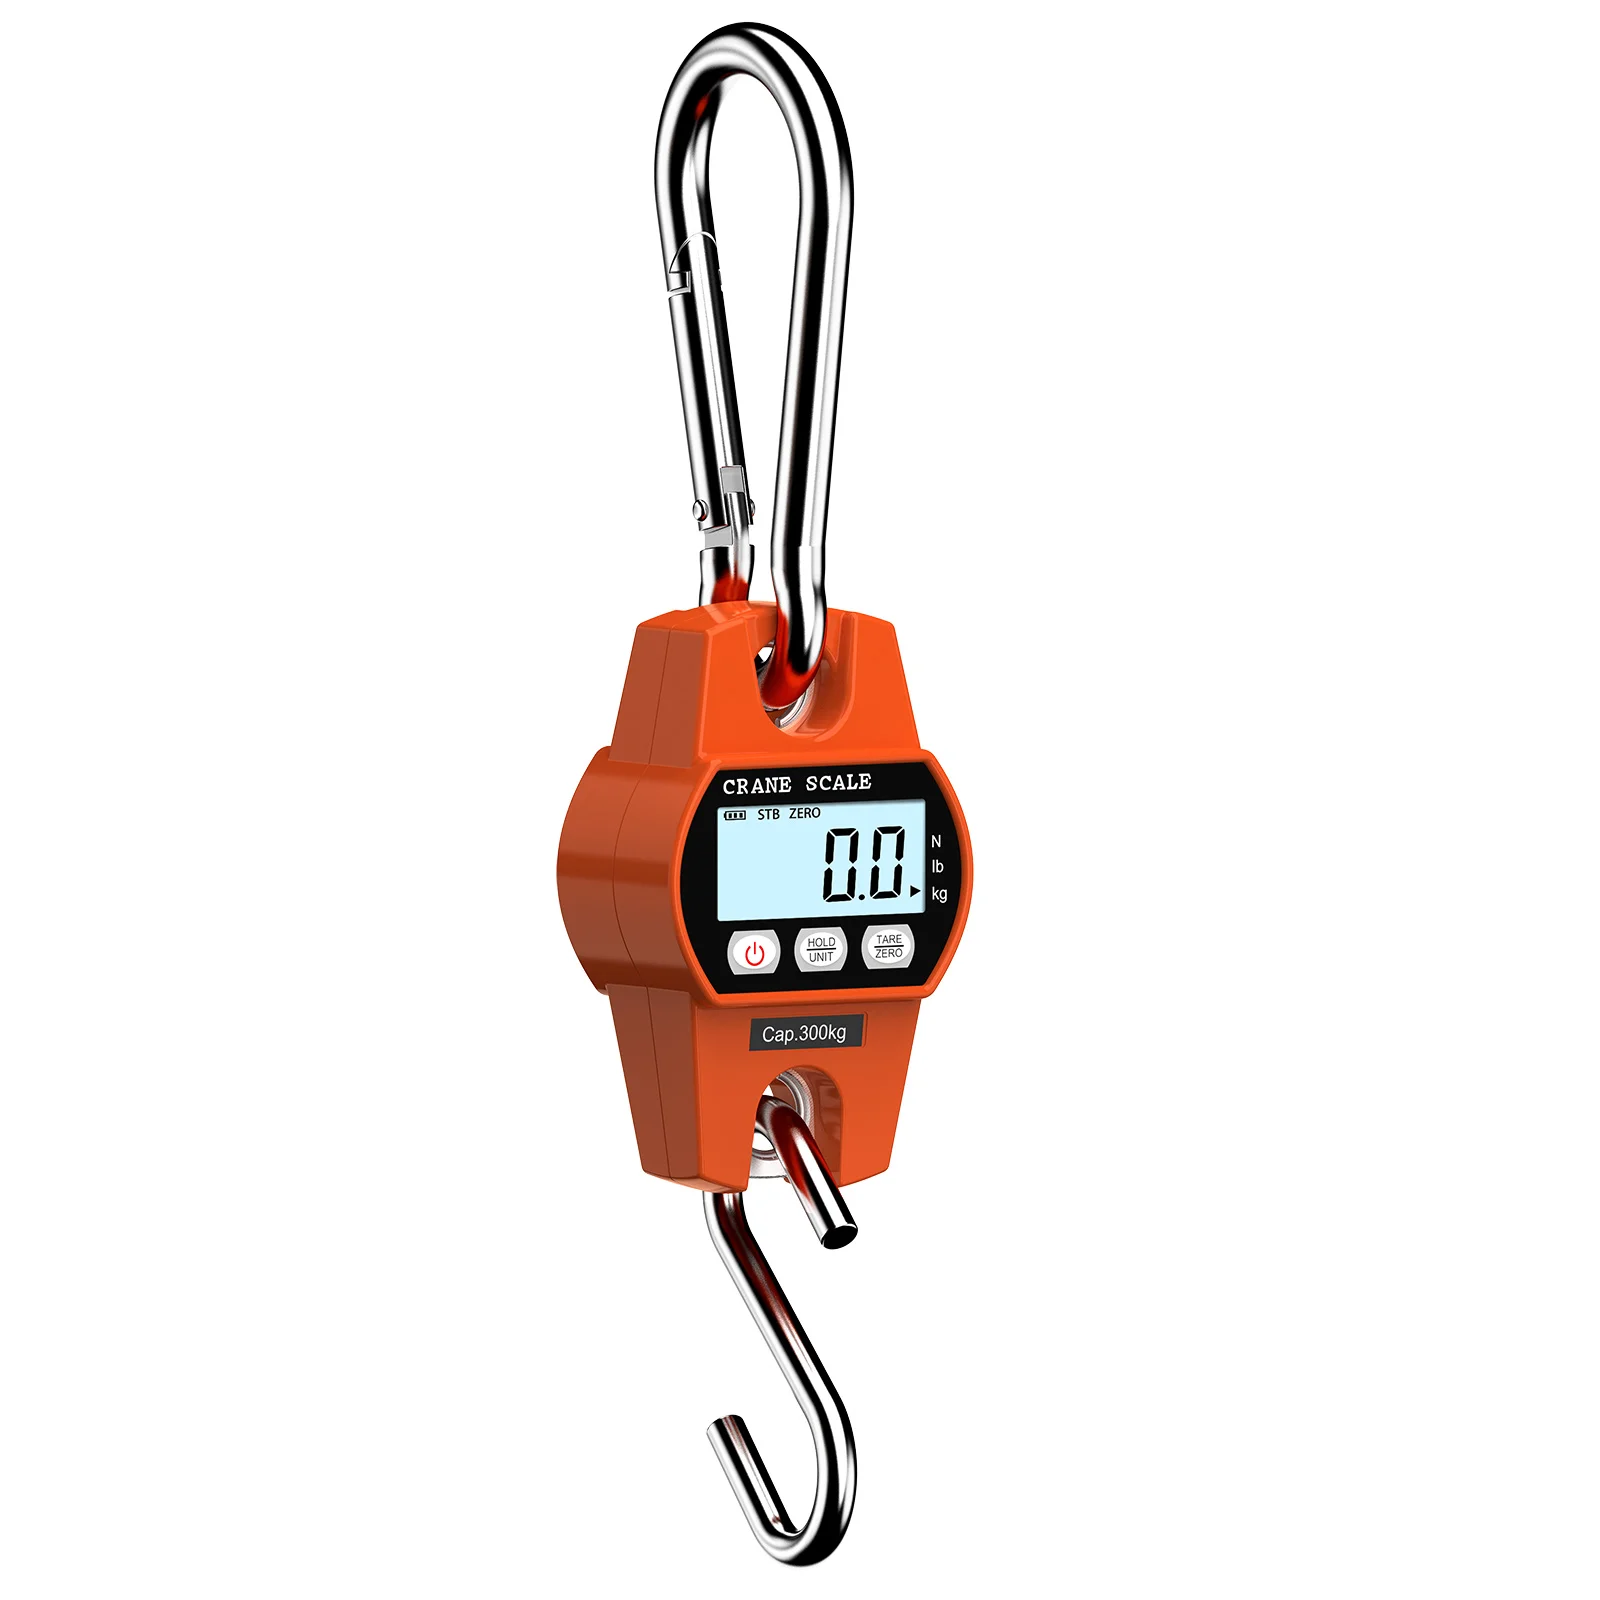 Portable Crane Scale 660lb/300kg Heavy Duty Electronic Digital Scales  Hanging Hook Scale Luggage Baggage Bag Weight Balance